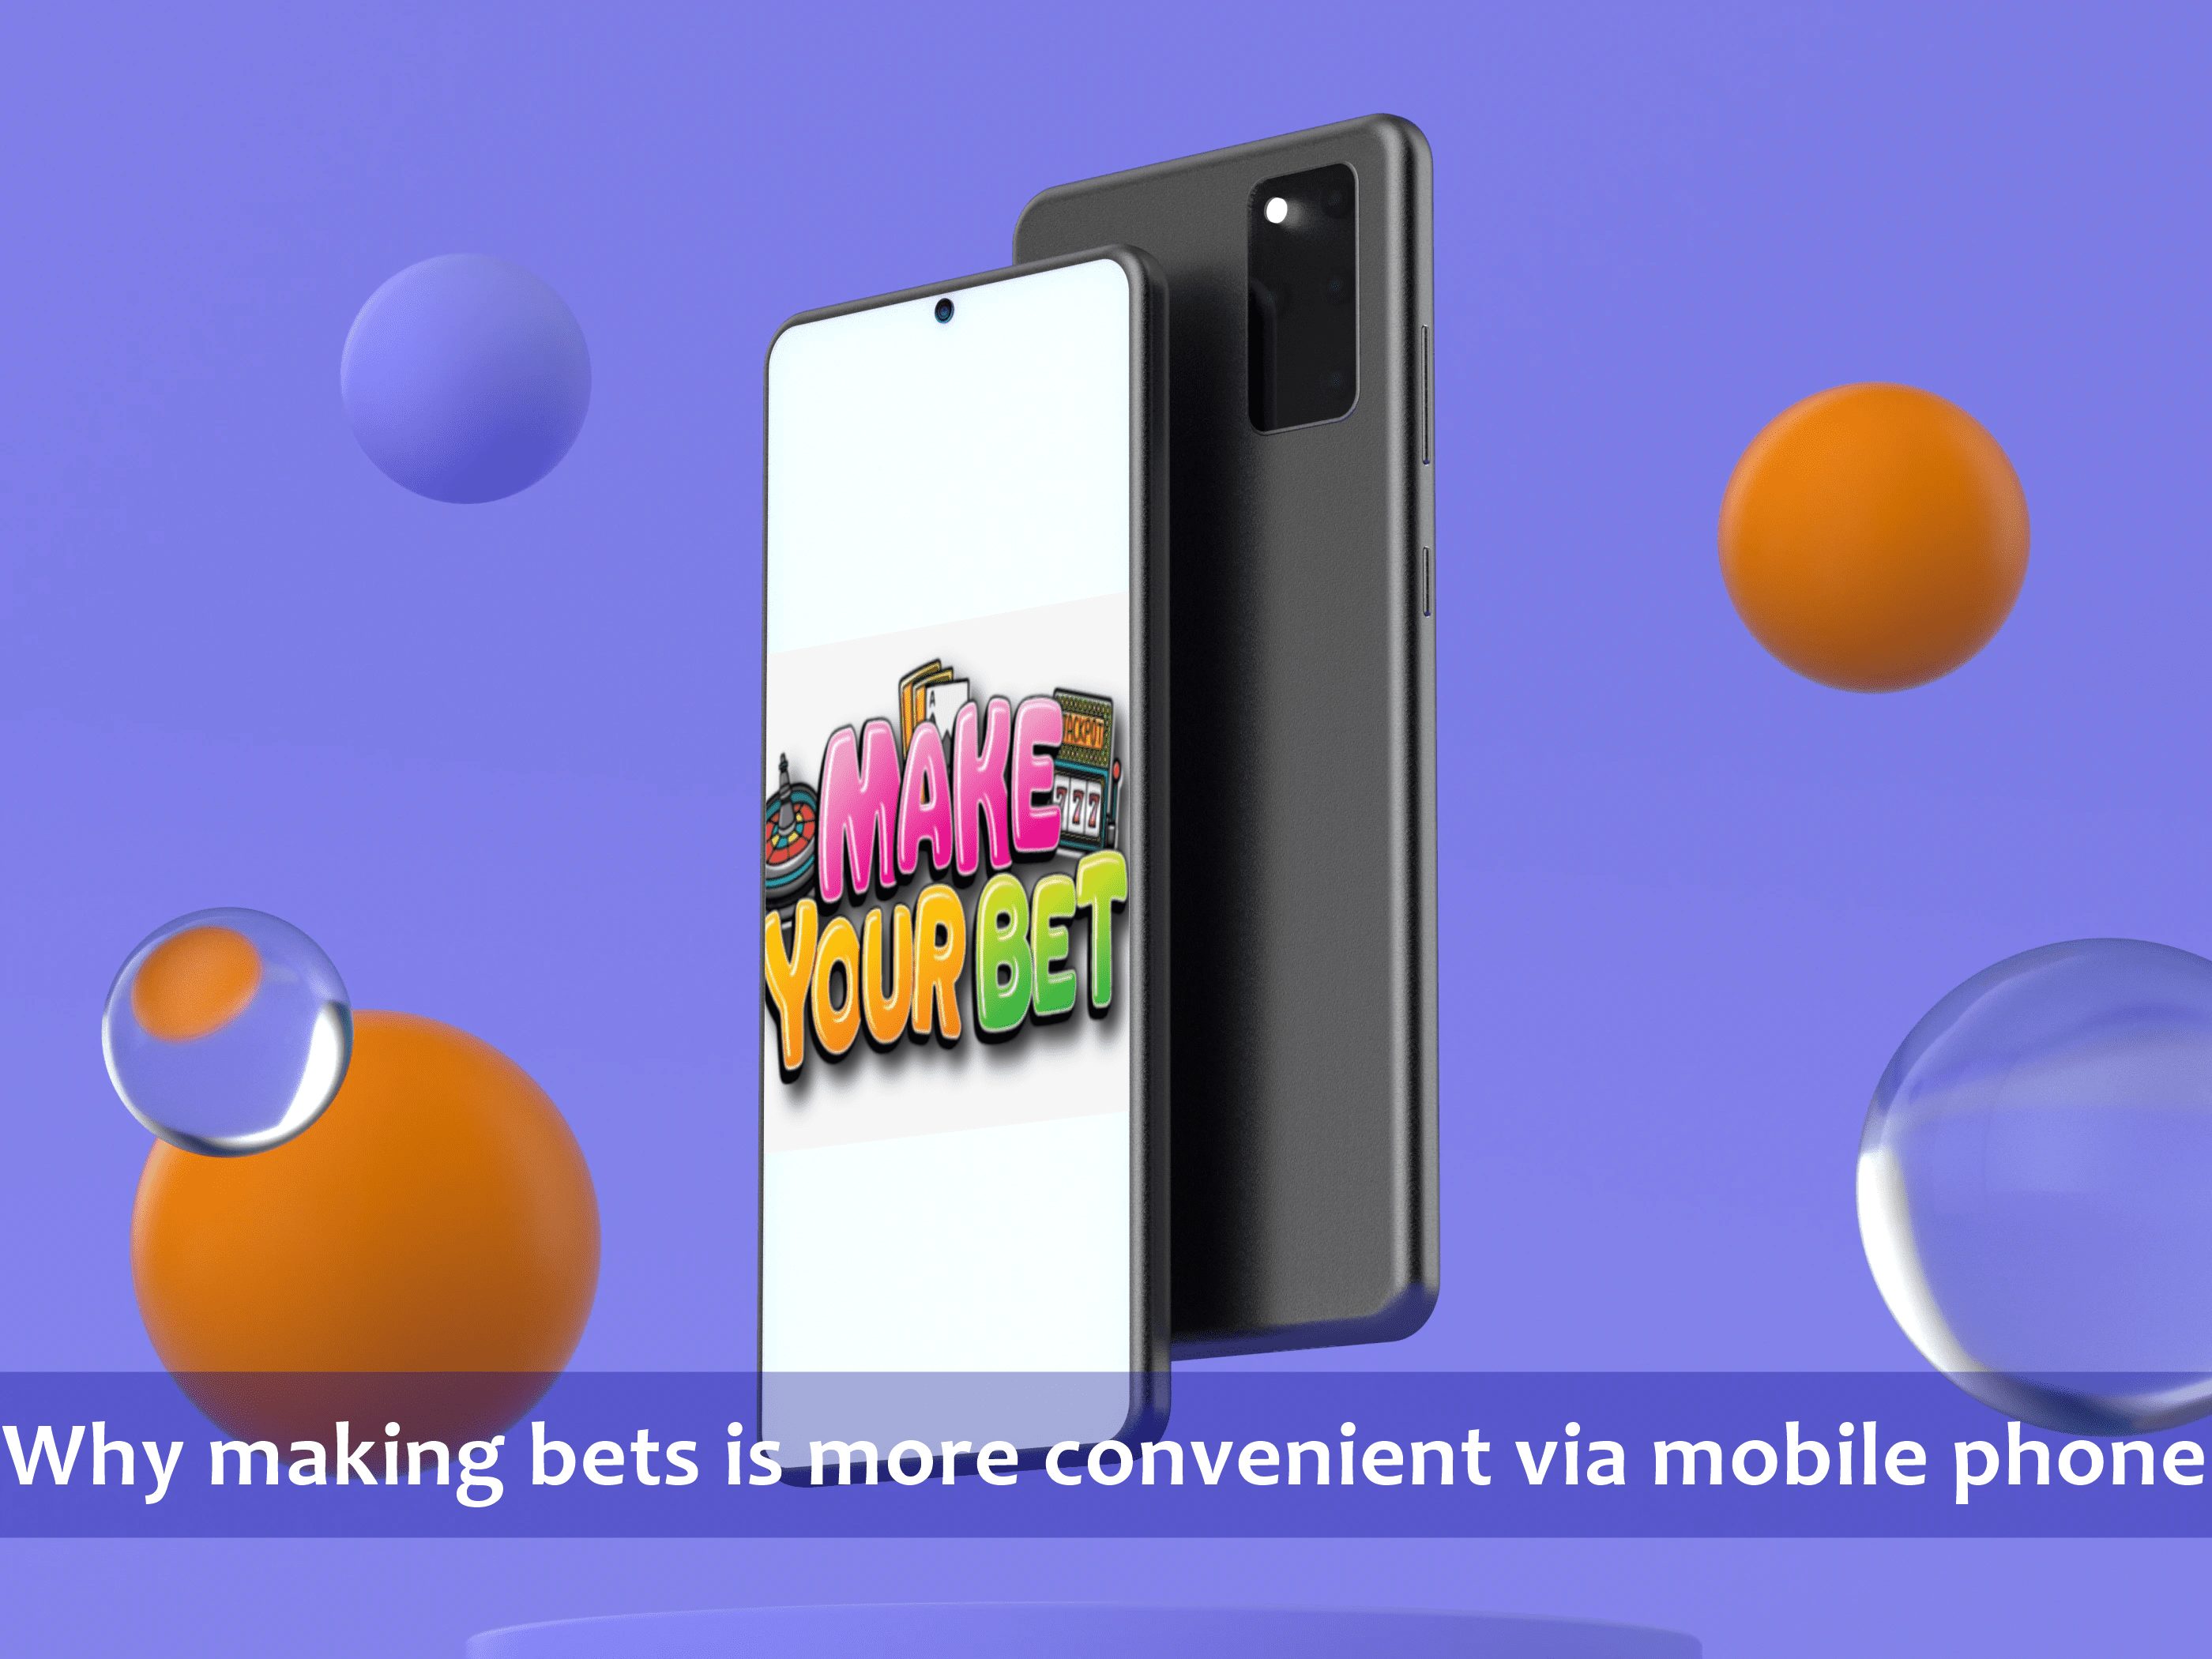 Why making bets is more convenient via mobile phone